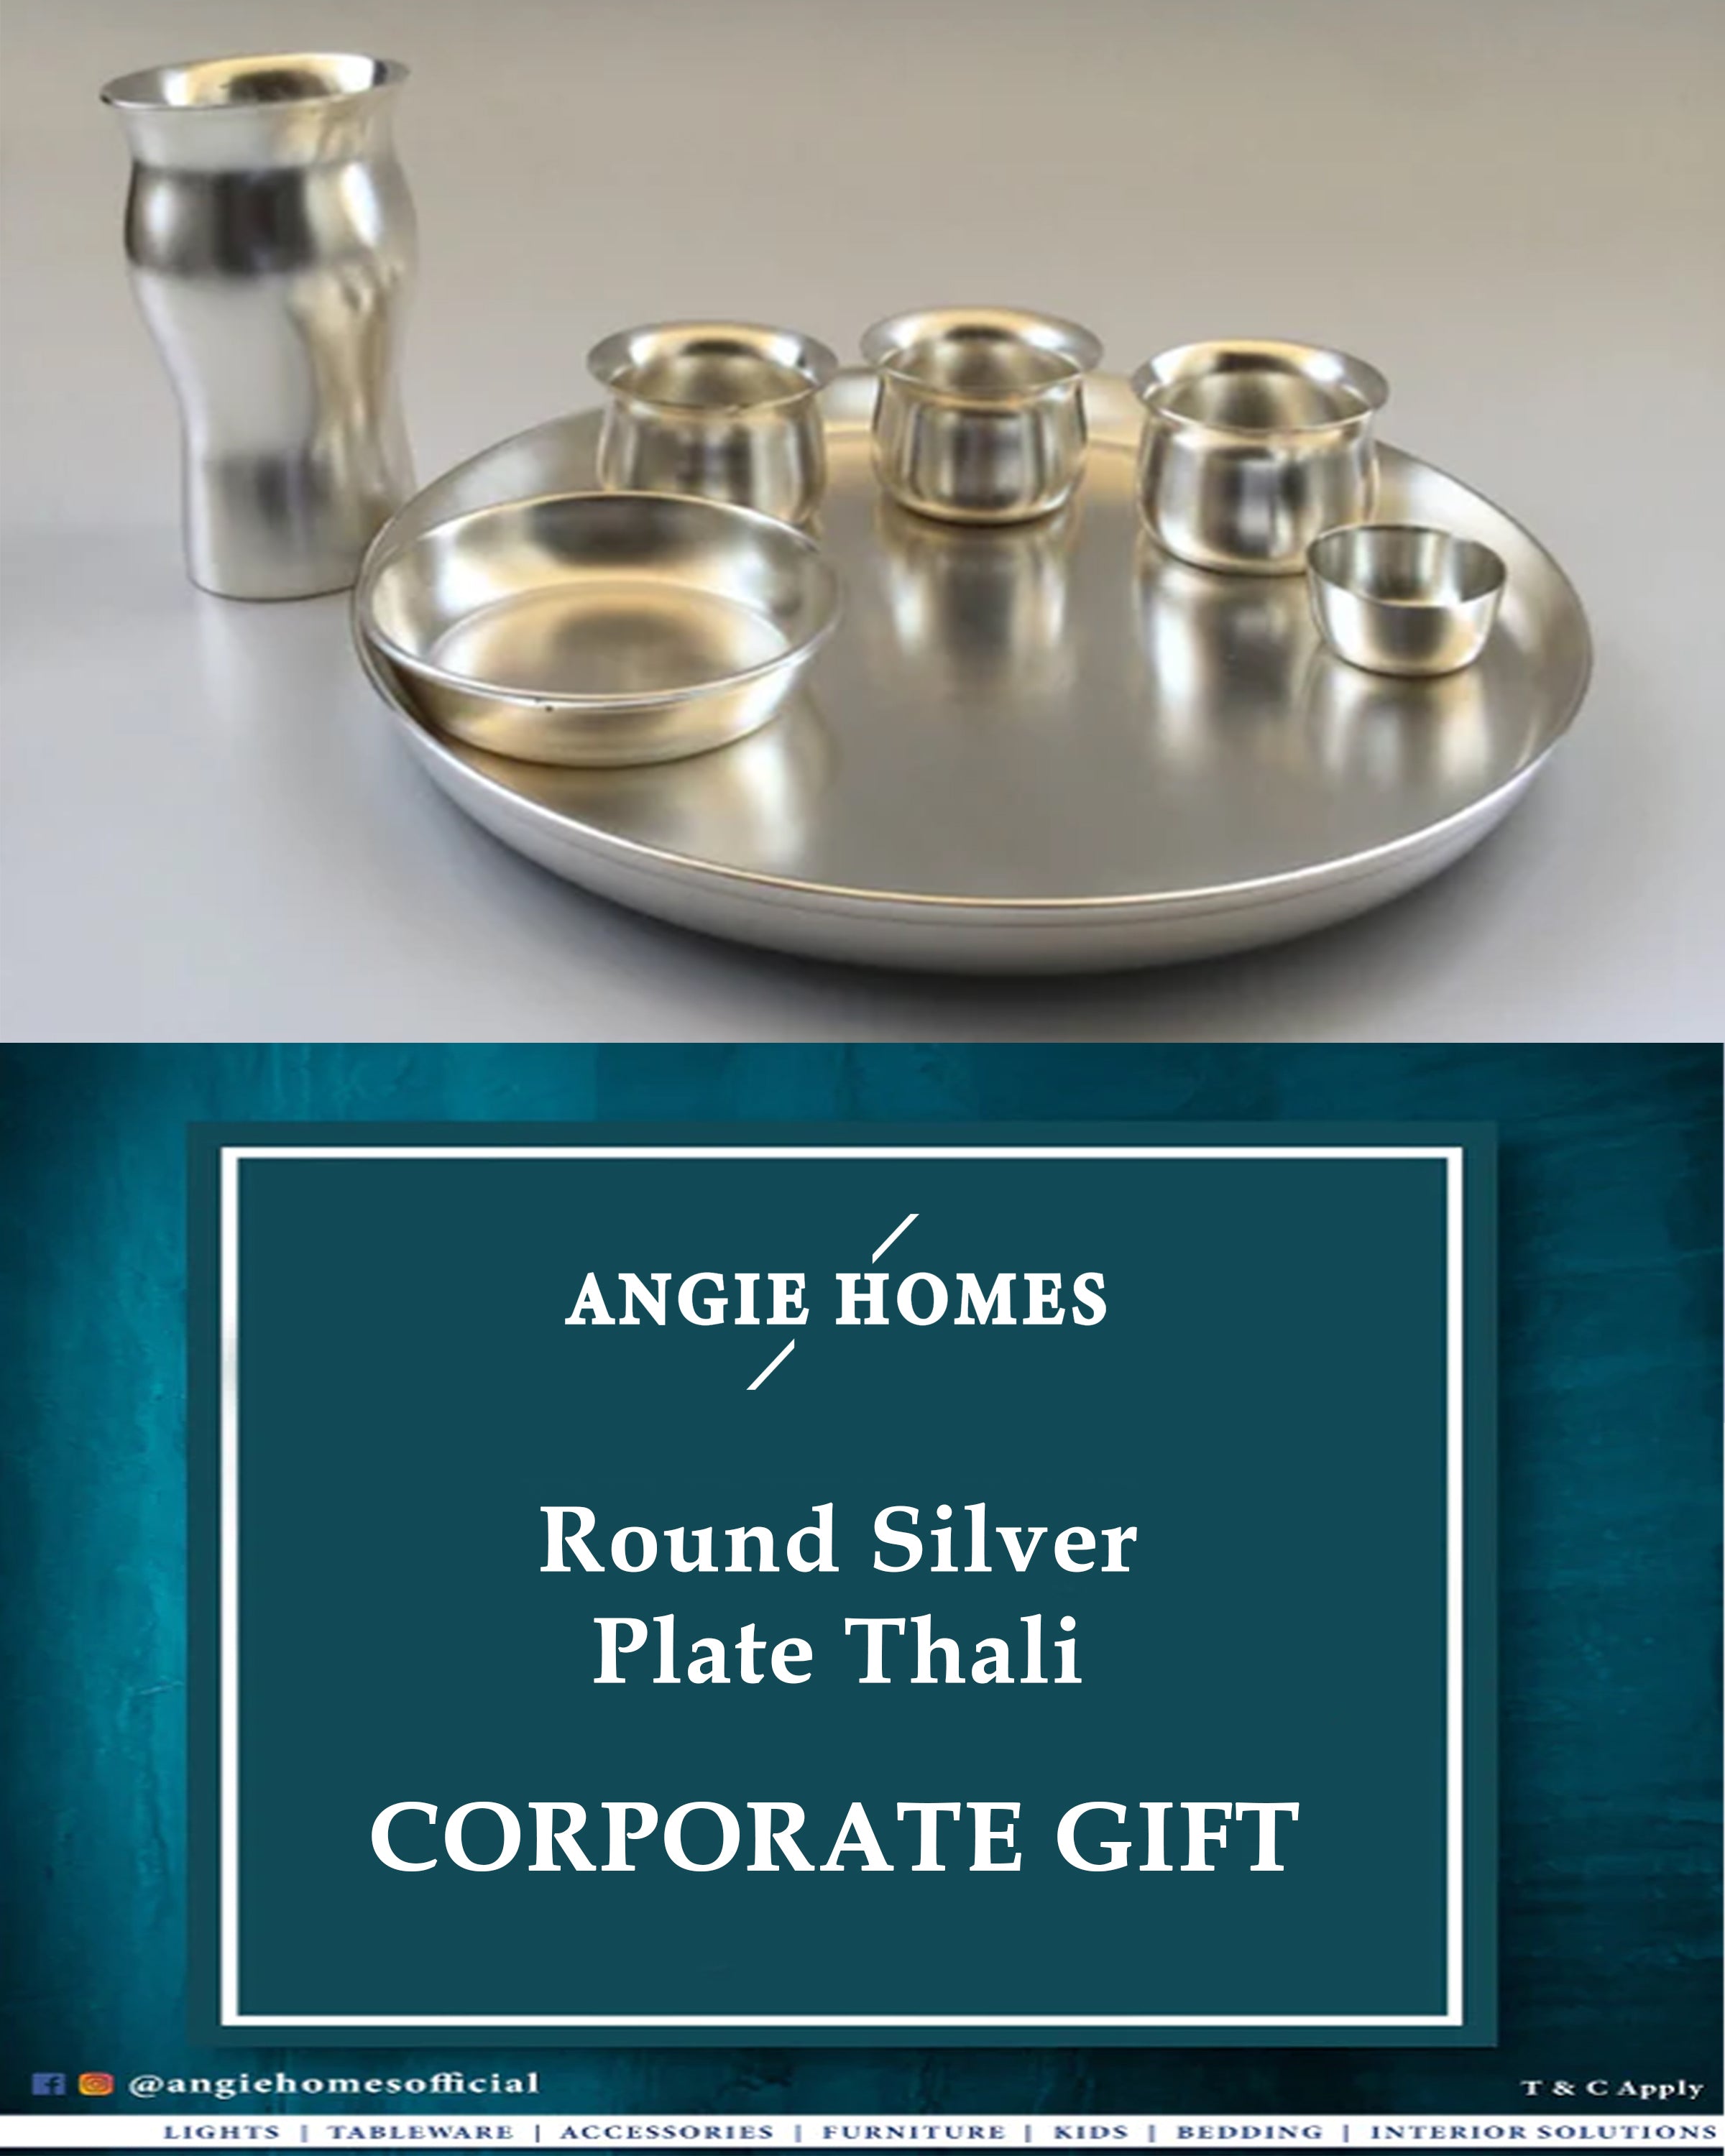 Round Silver Plate Thali for Wedding, House Warming & Corporate Gift ANGIE HOMES